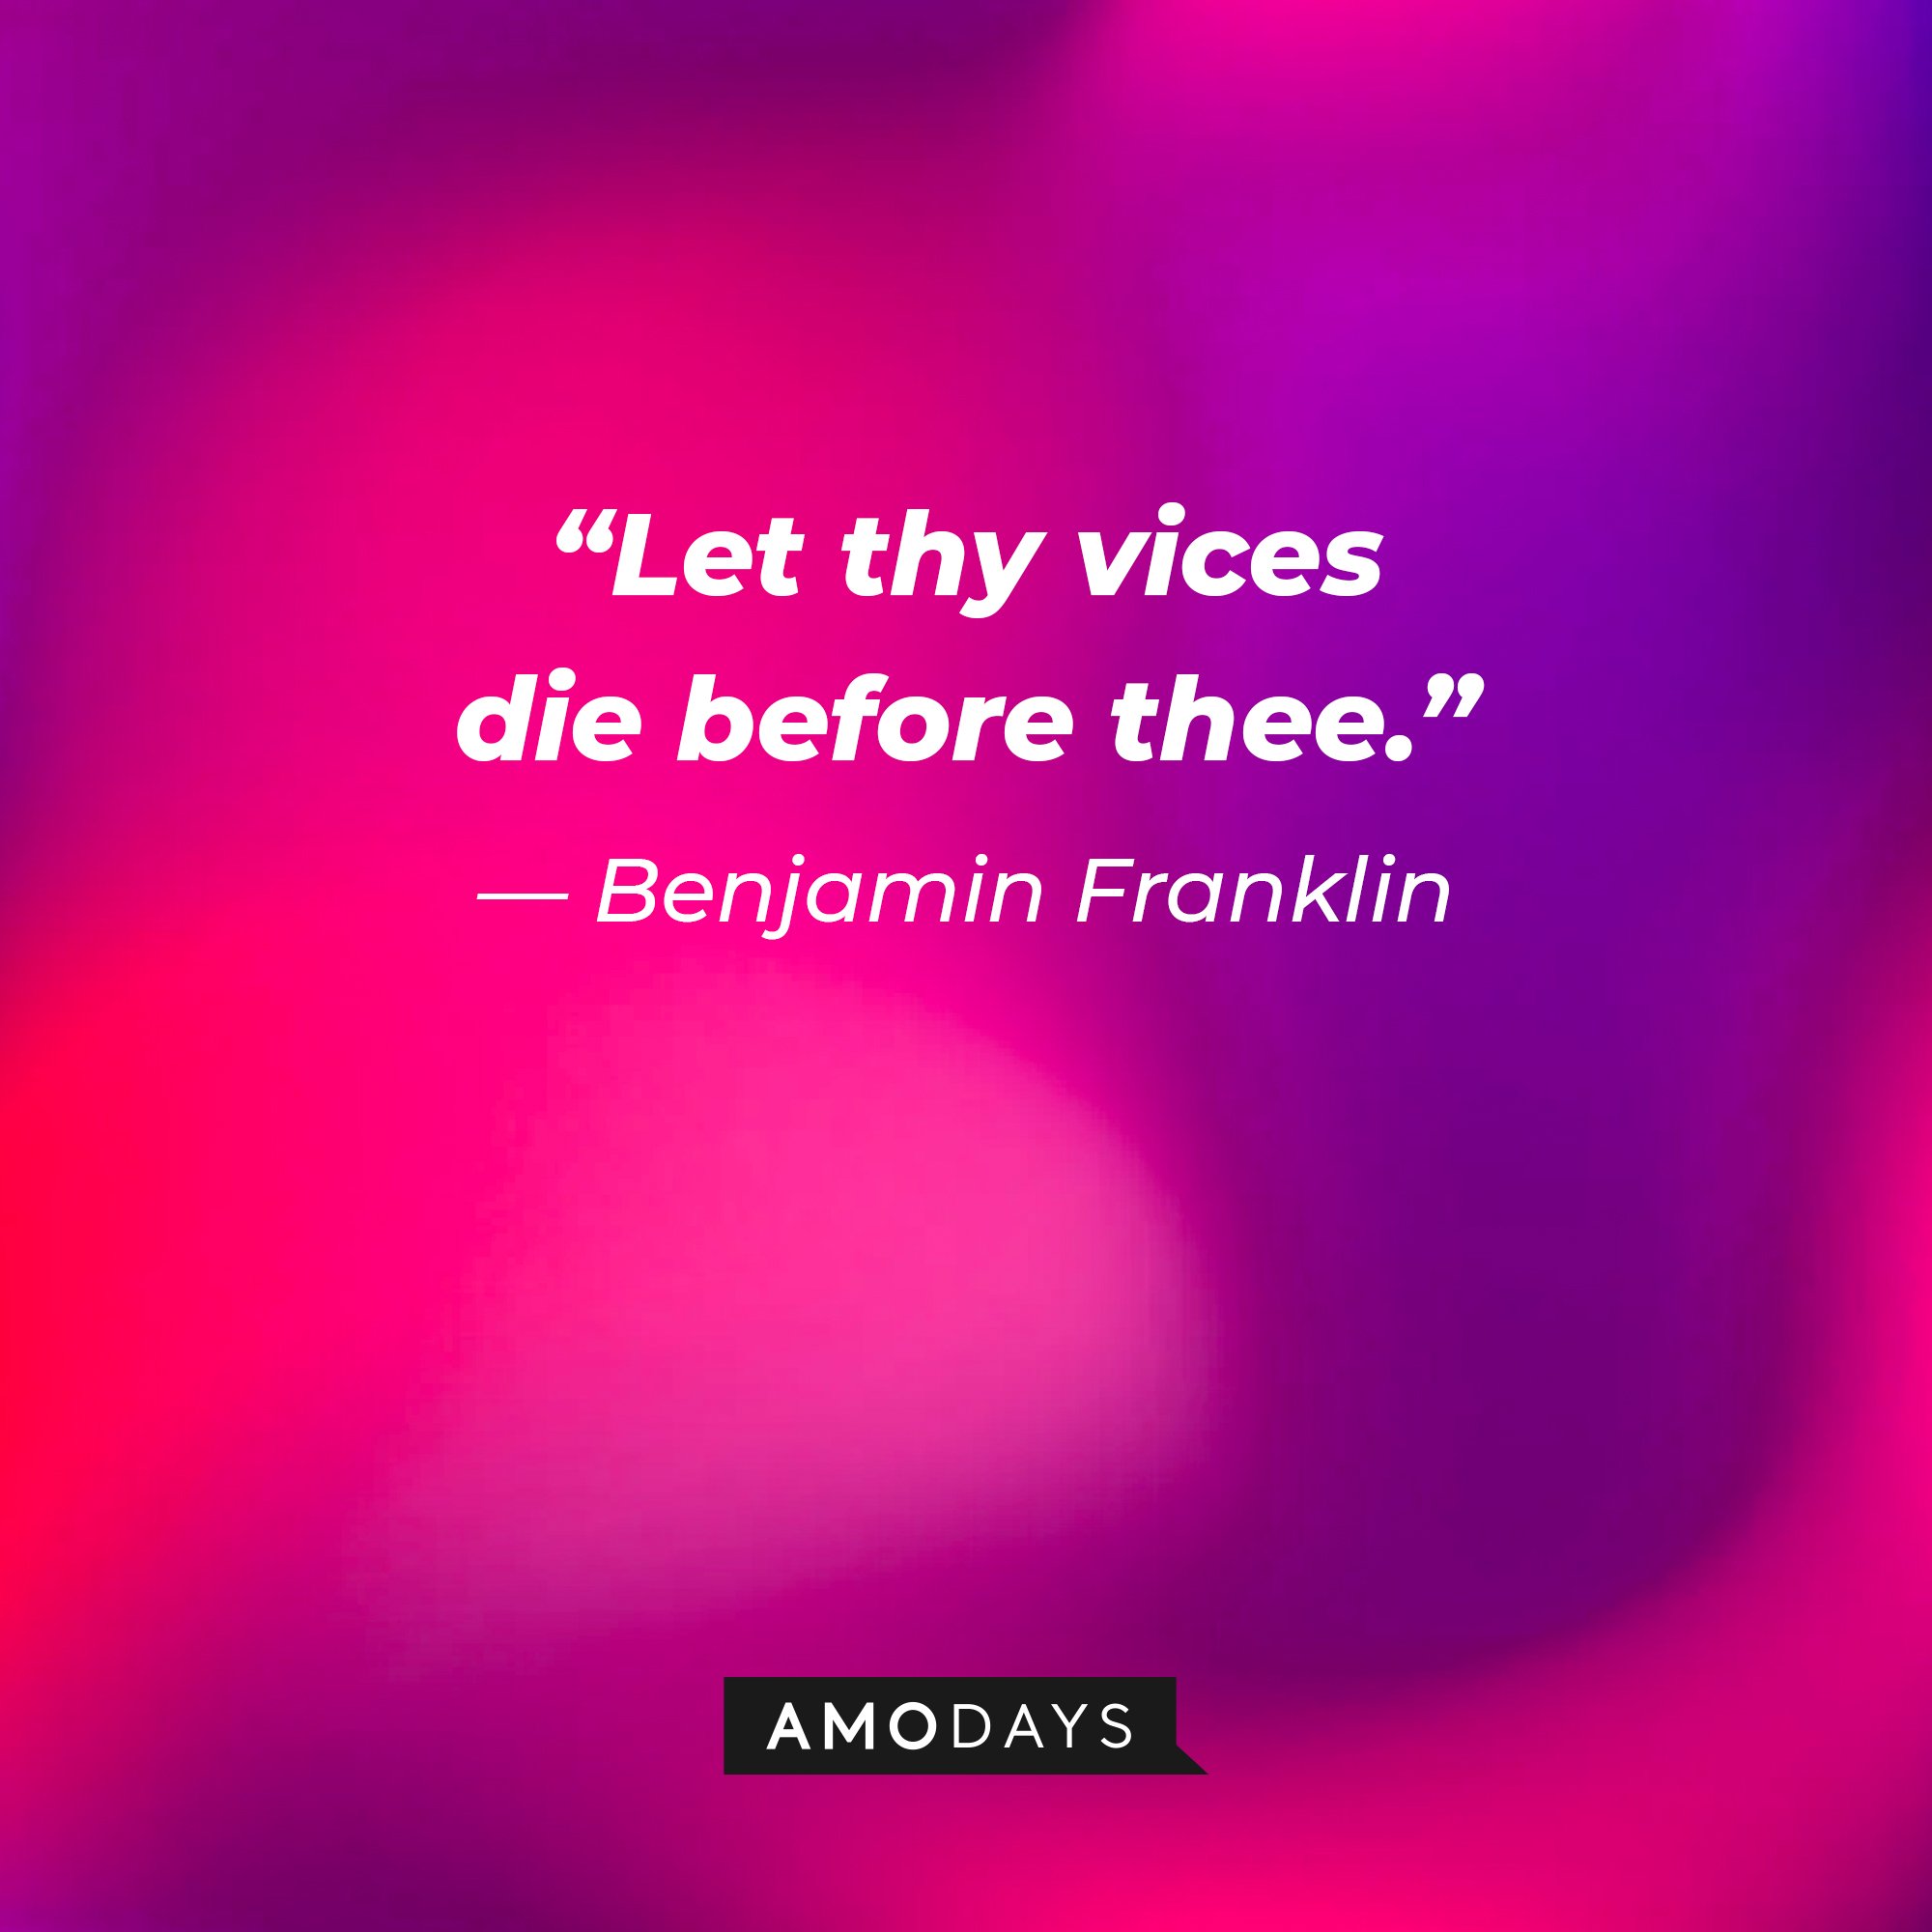 Benjamin Franklin’s quote: “Let thy vices die before thee.” | Image: AmoDays